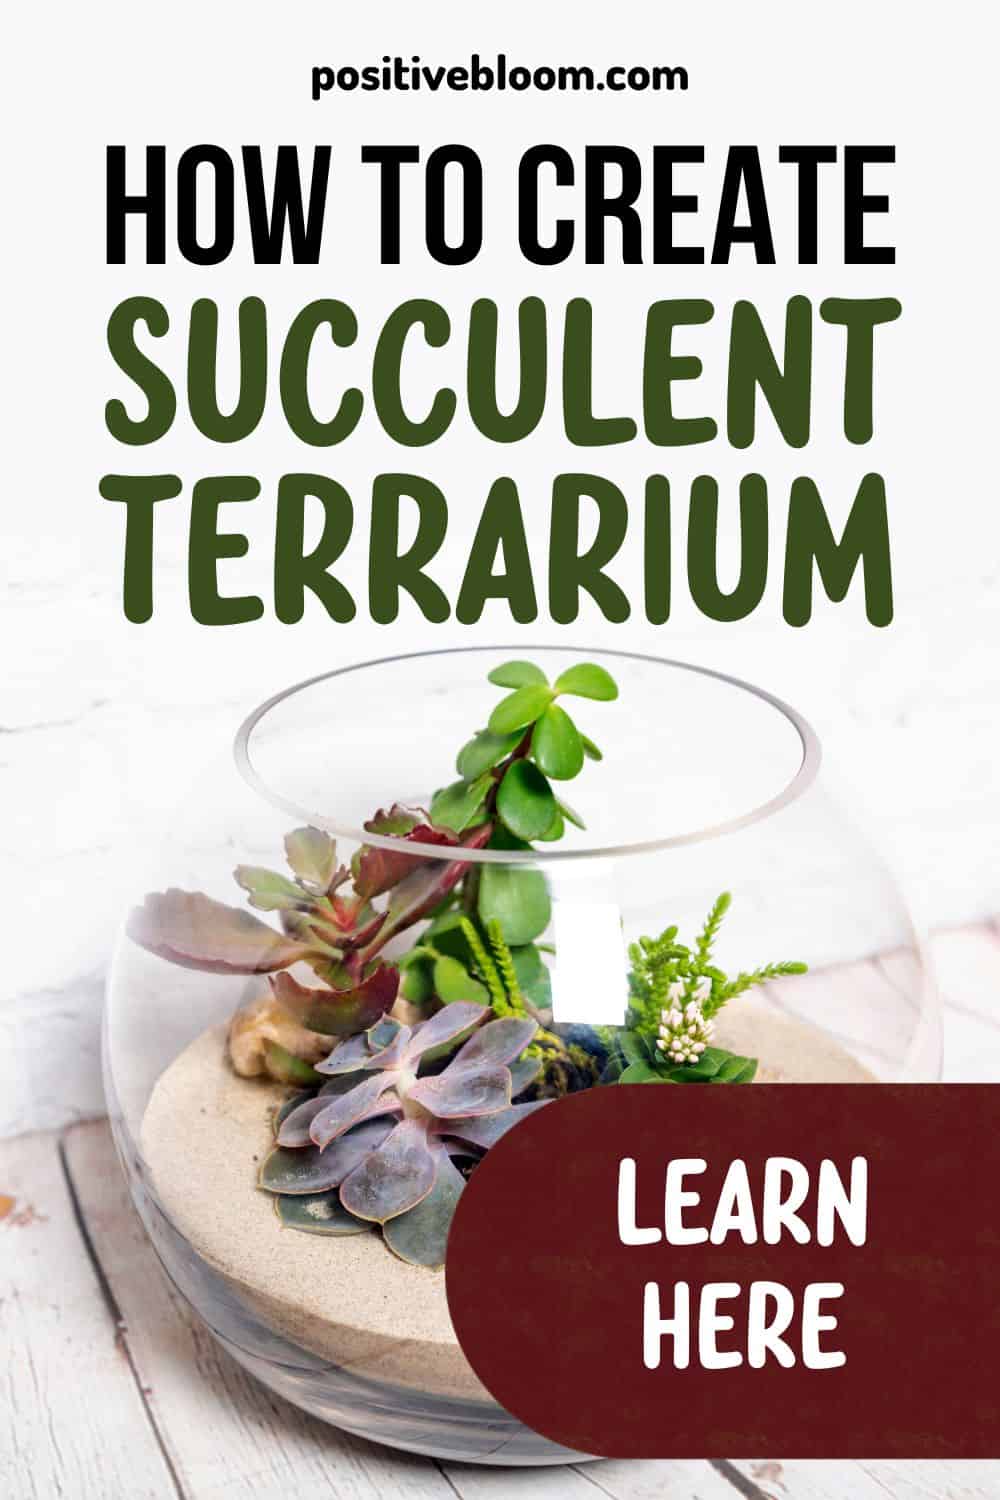 How To Create A Succulent Terrarium Step-by-step Guide Pinterest